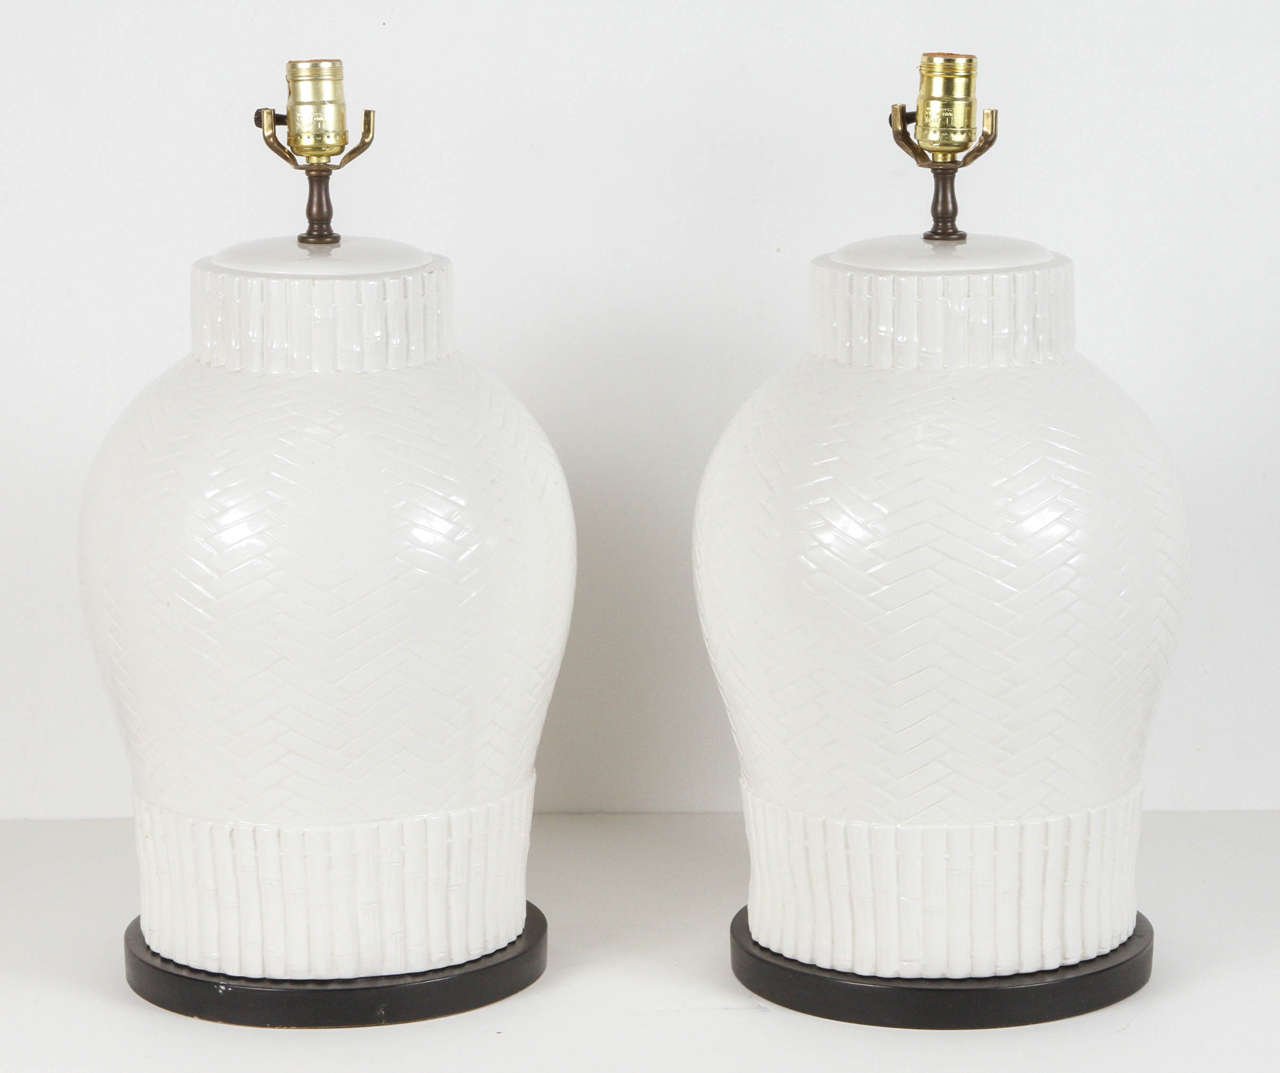 Pair of large white French Chinese style textured porcelain table lamps.
1930s French "chinoiserie" style, porcelain textured with bamboo design.